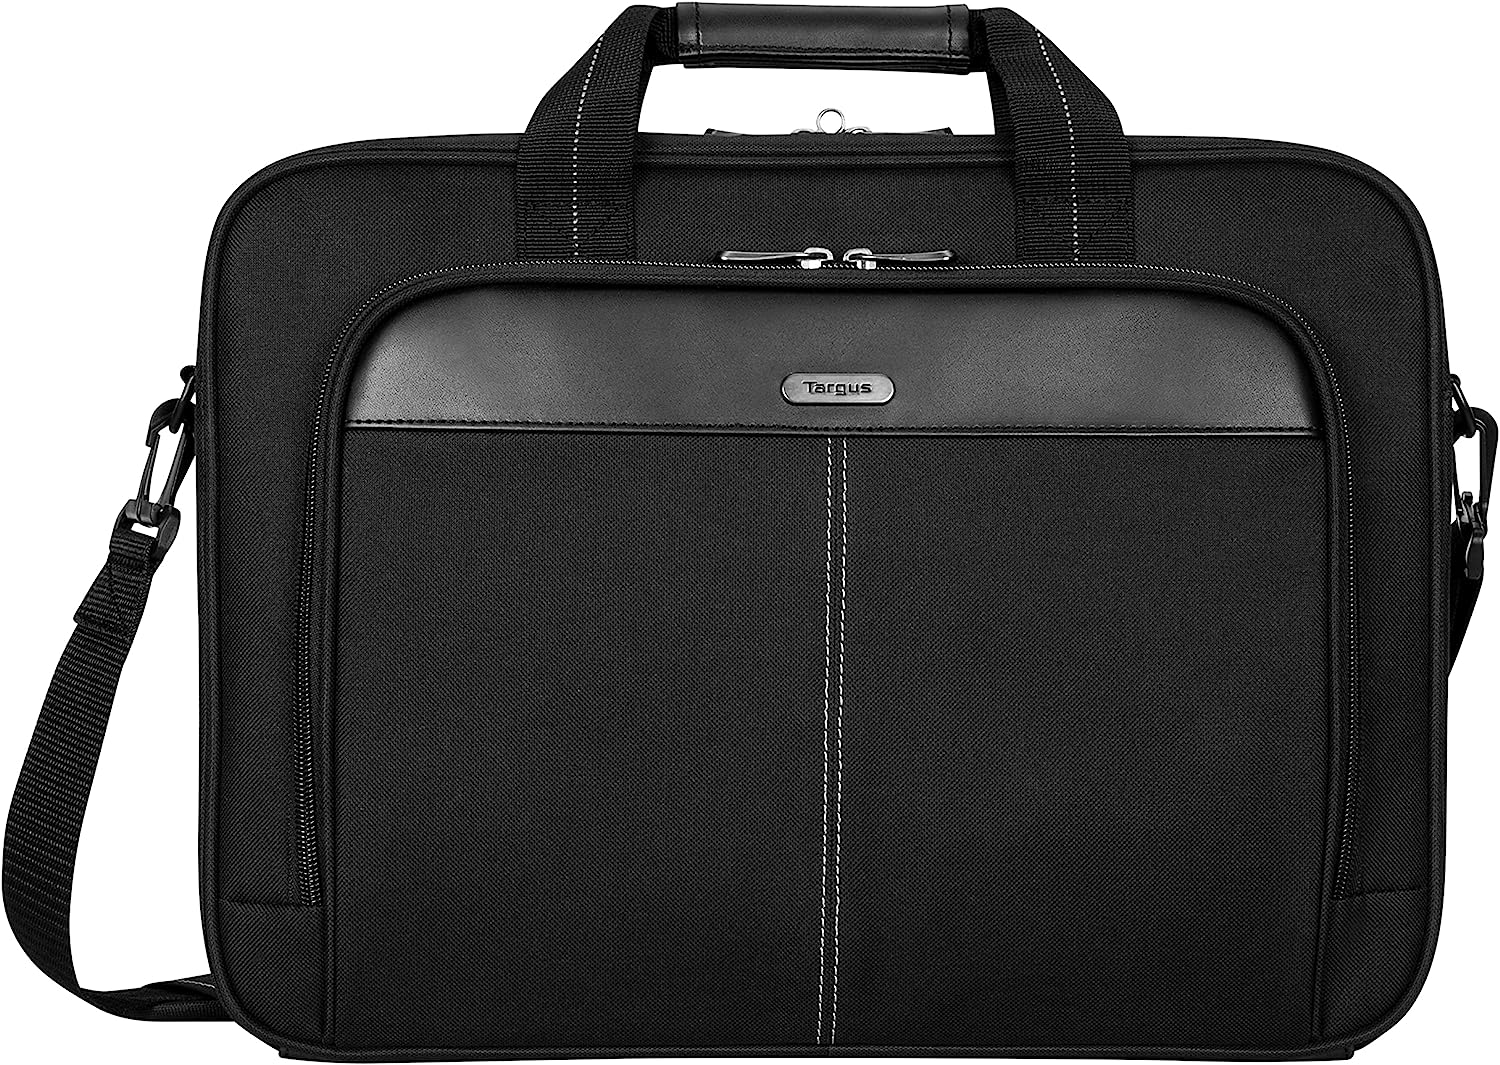 padded laptop bag detailed review